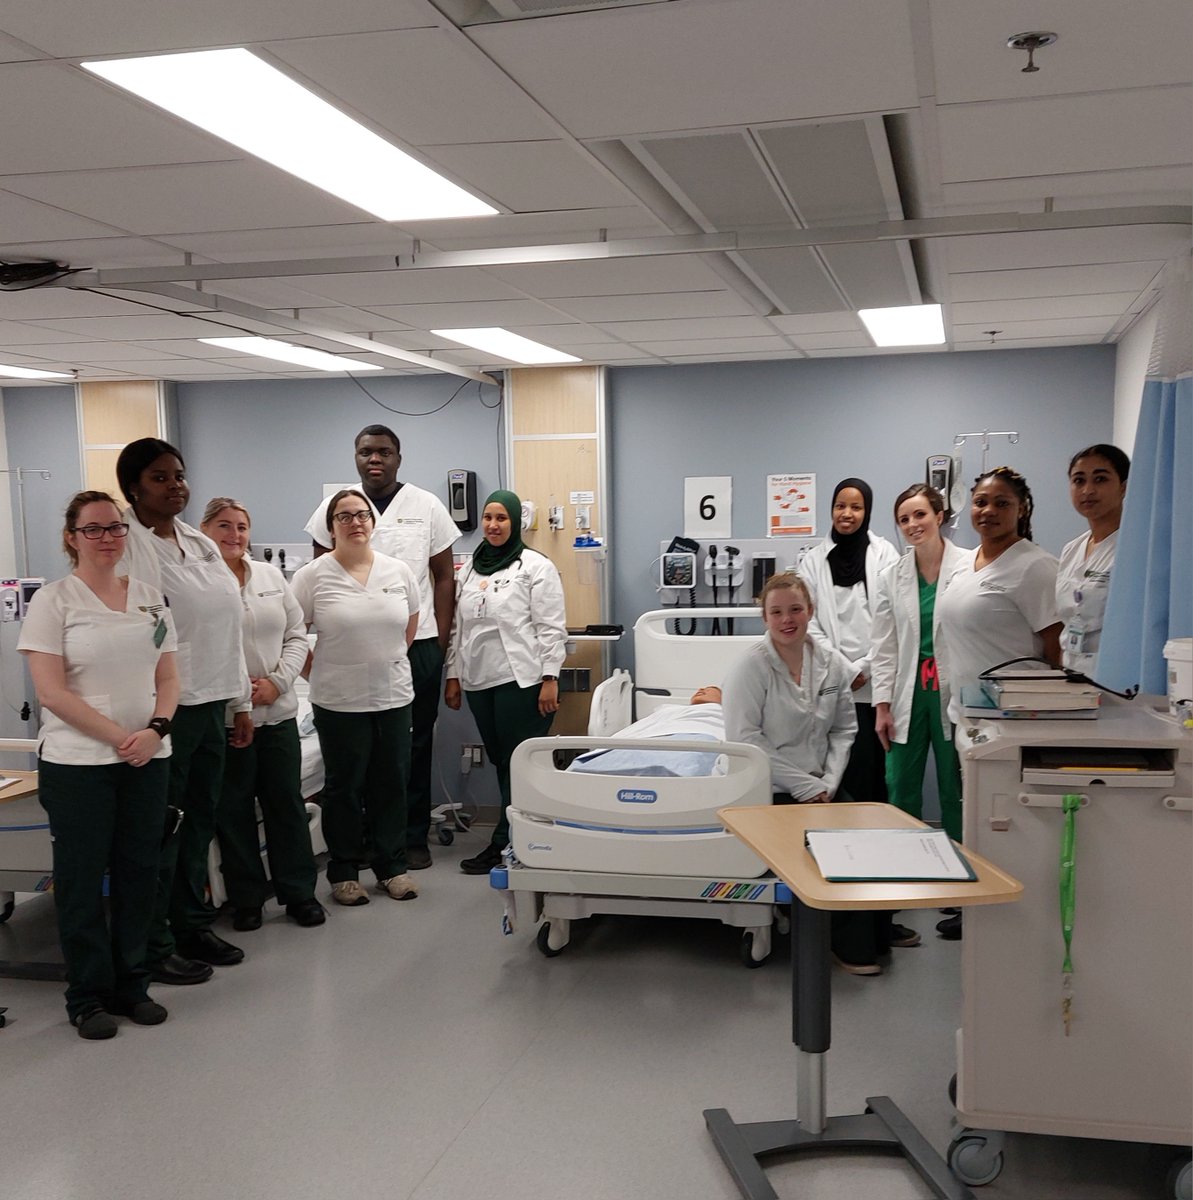 #USaskNursing students from our #USask #YPA campus finished their NURS 203 labs!

L to R: Kaiyla, Mildred, Kylie, Lana, Emmanuel, Faiso, Megan, Hanan, Lydia (instructor), Bernice, and Serah

#Nursing #IKnowANurse #WeAnswerTheCall